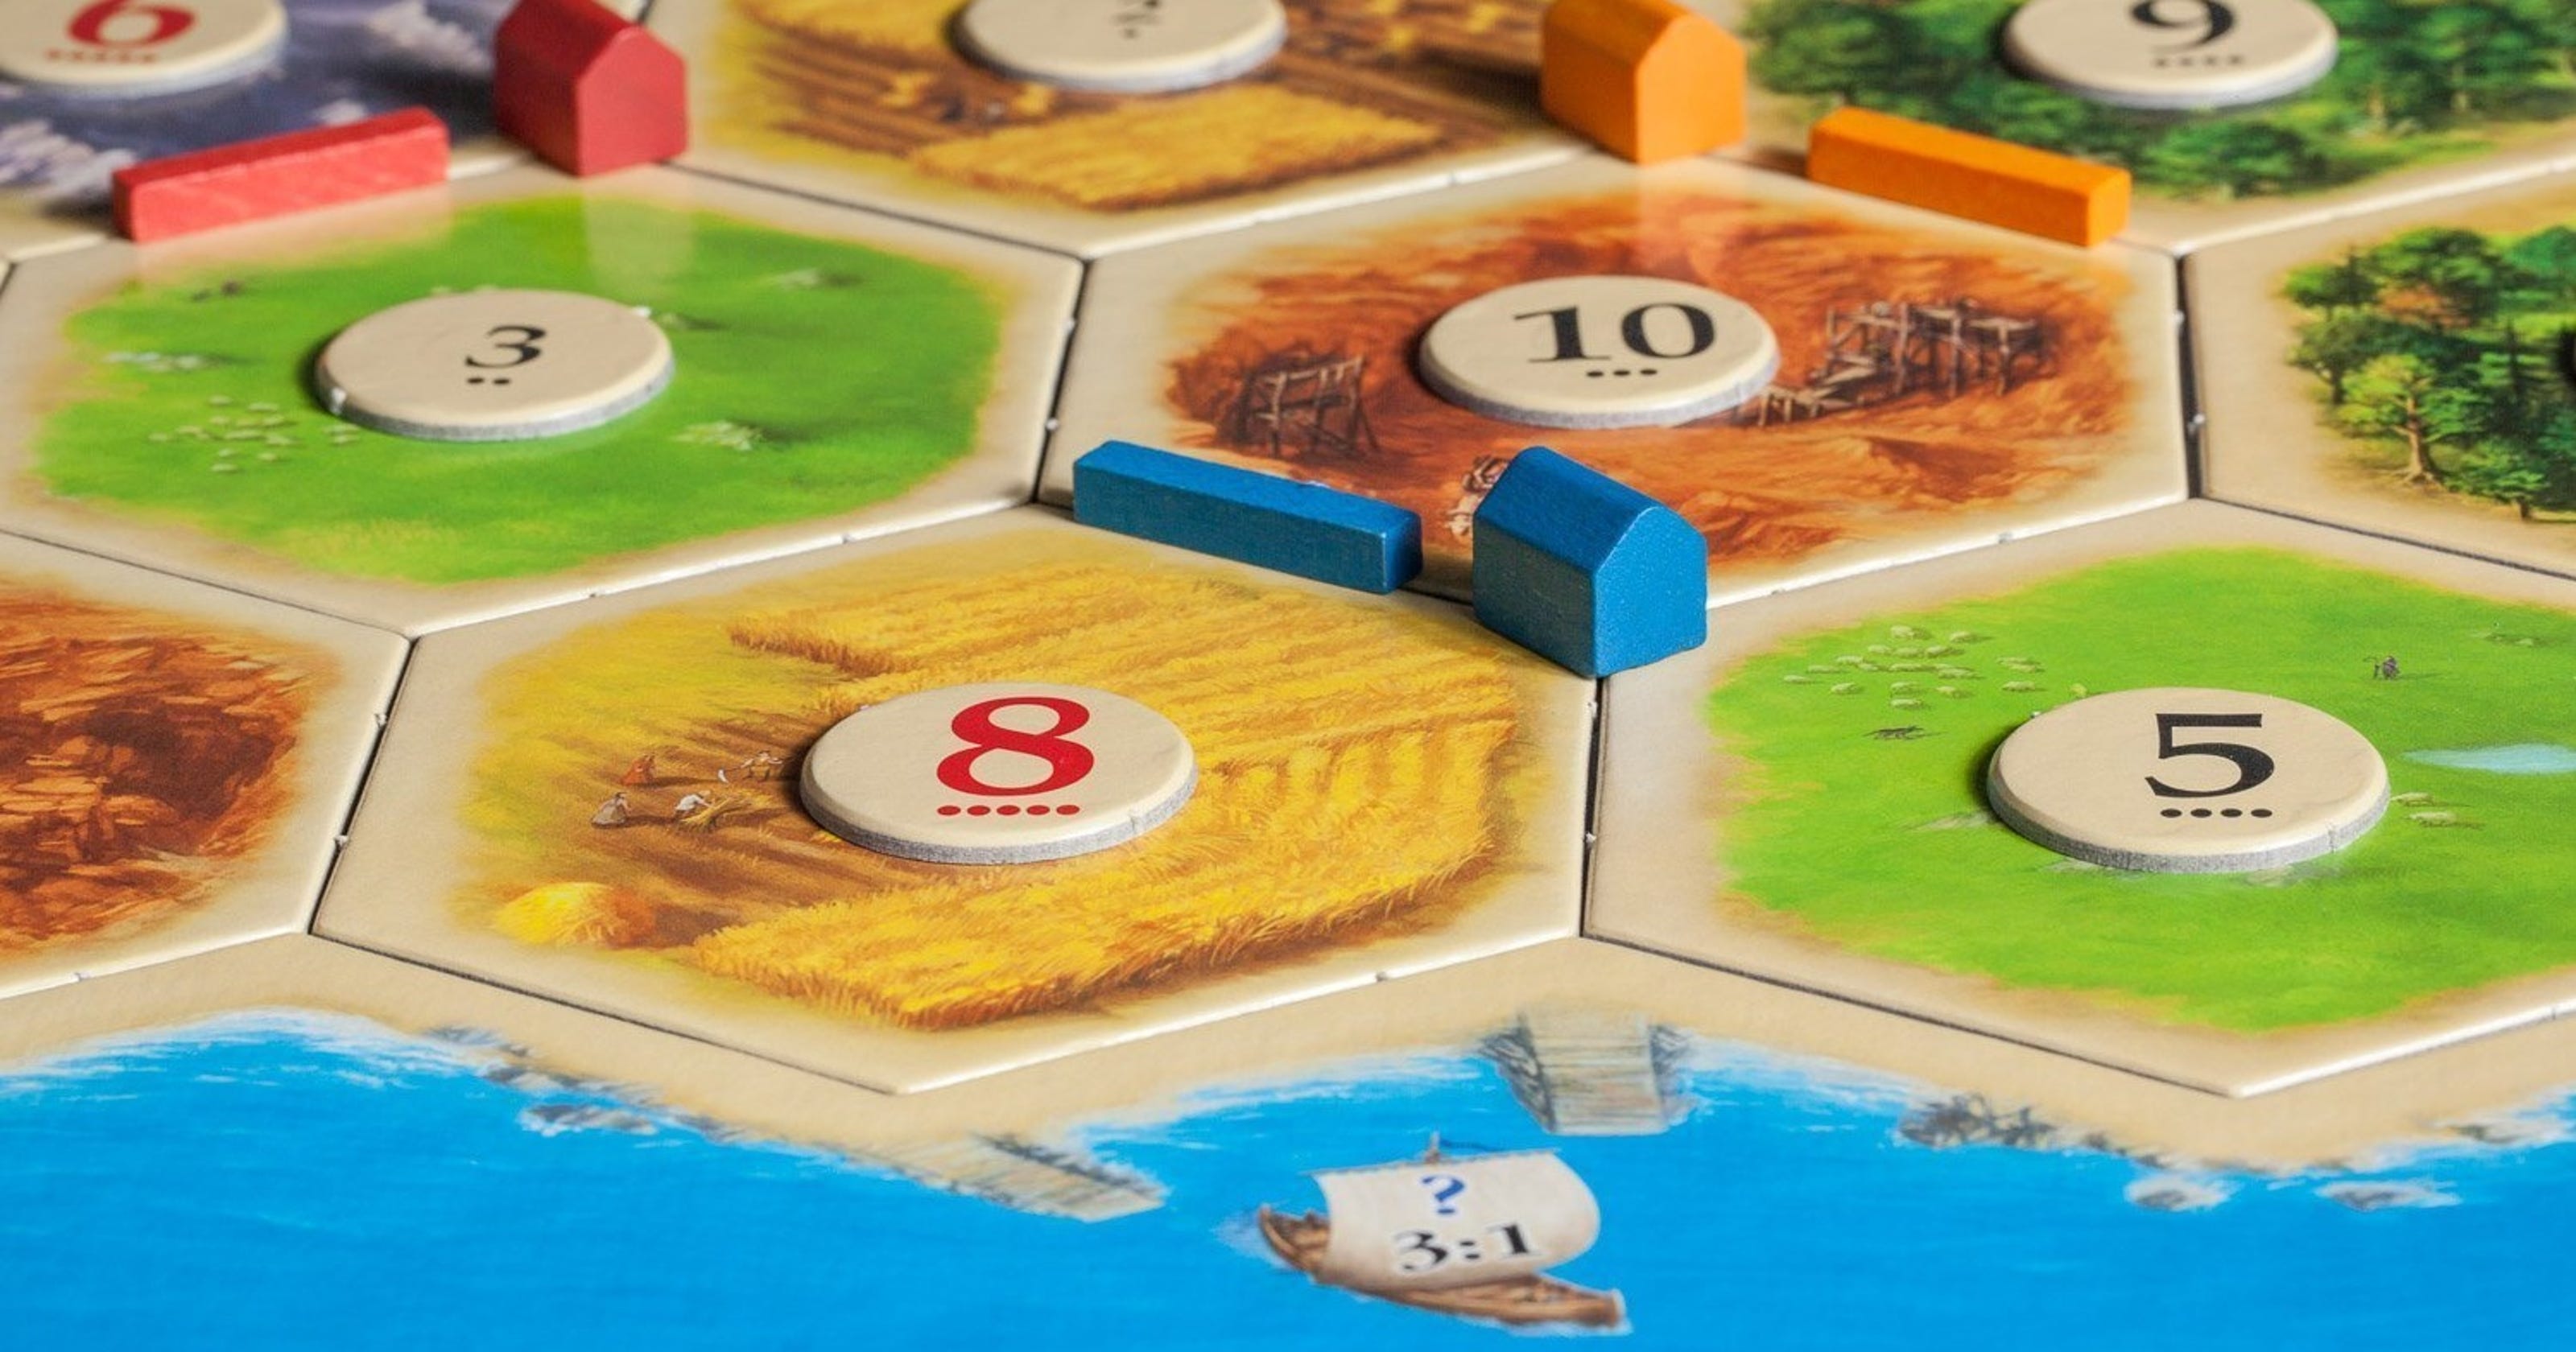 14 of the most popular board games on Amazon this summer